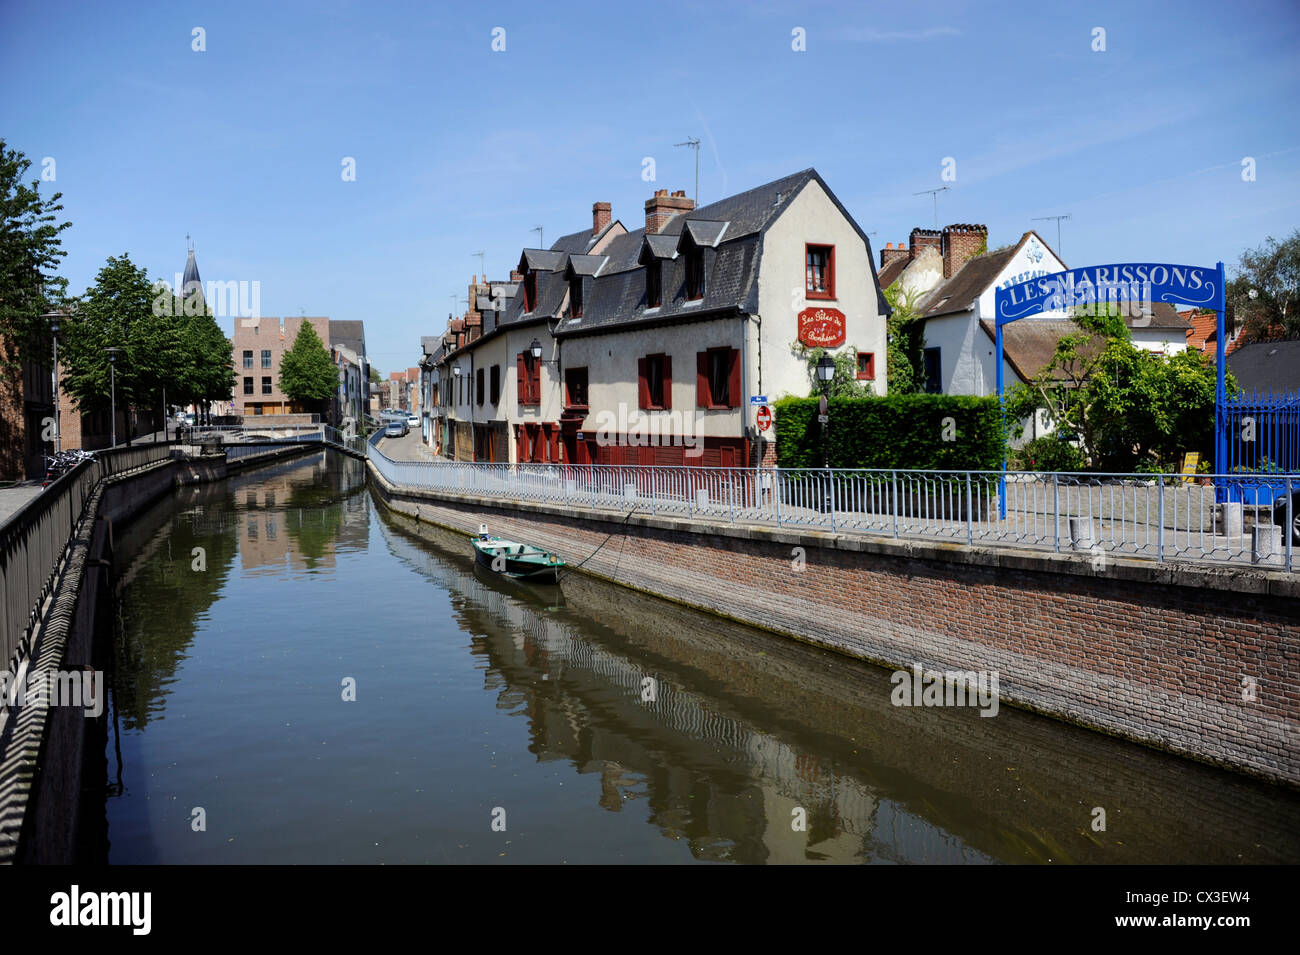 Restaurant, Somme River, Amiens, Somme, Picardie, Frankreich Stockfoto